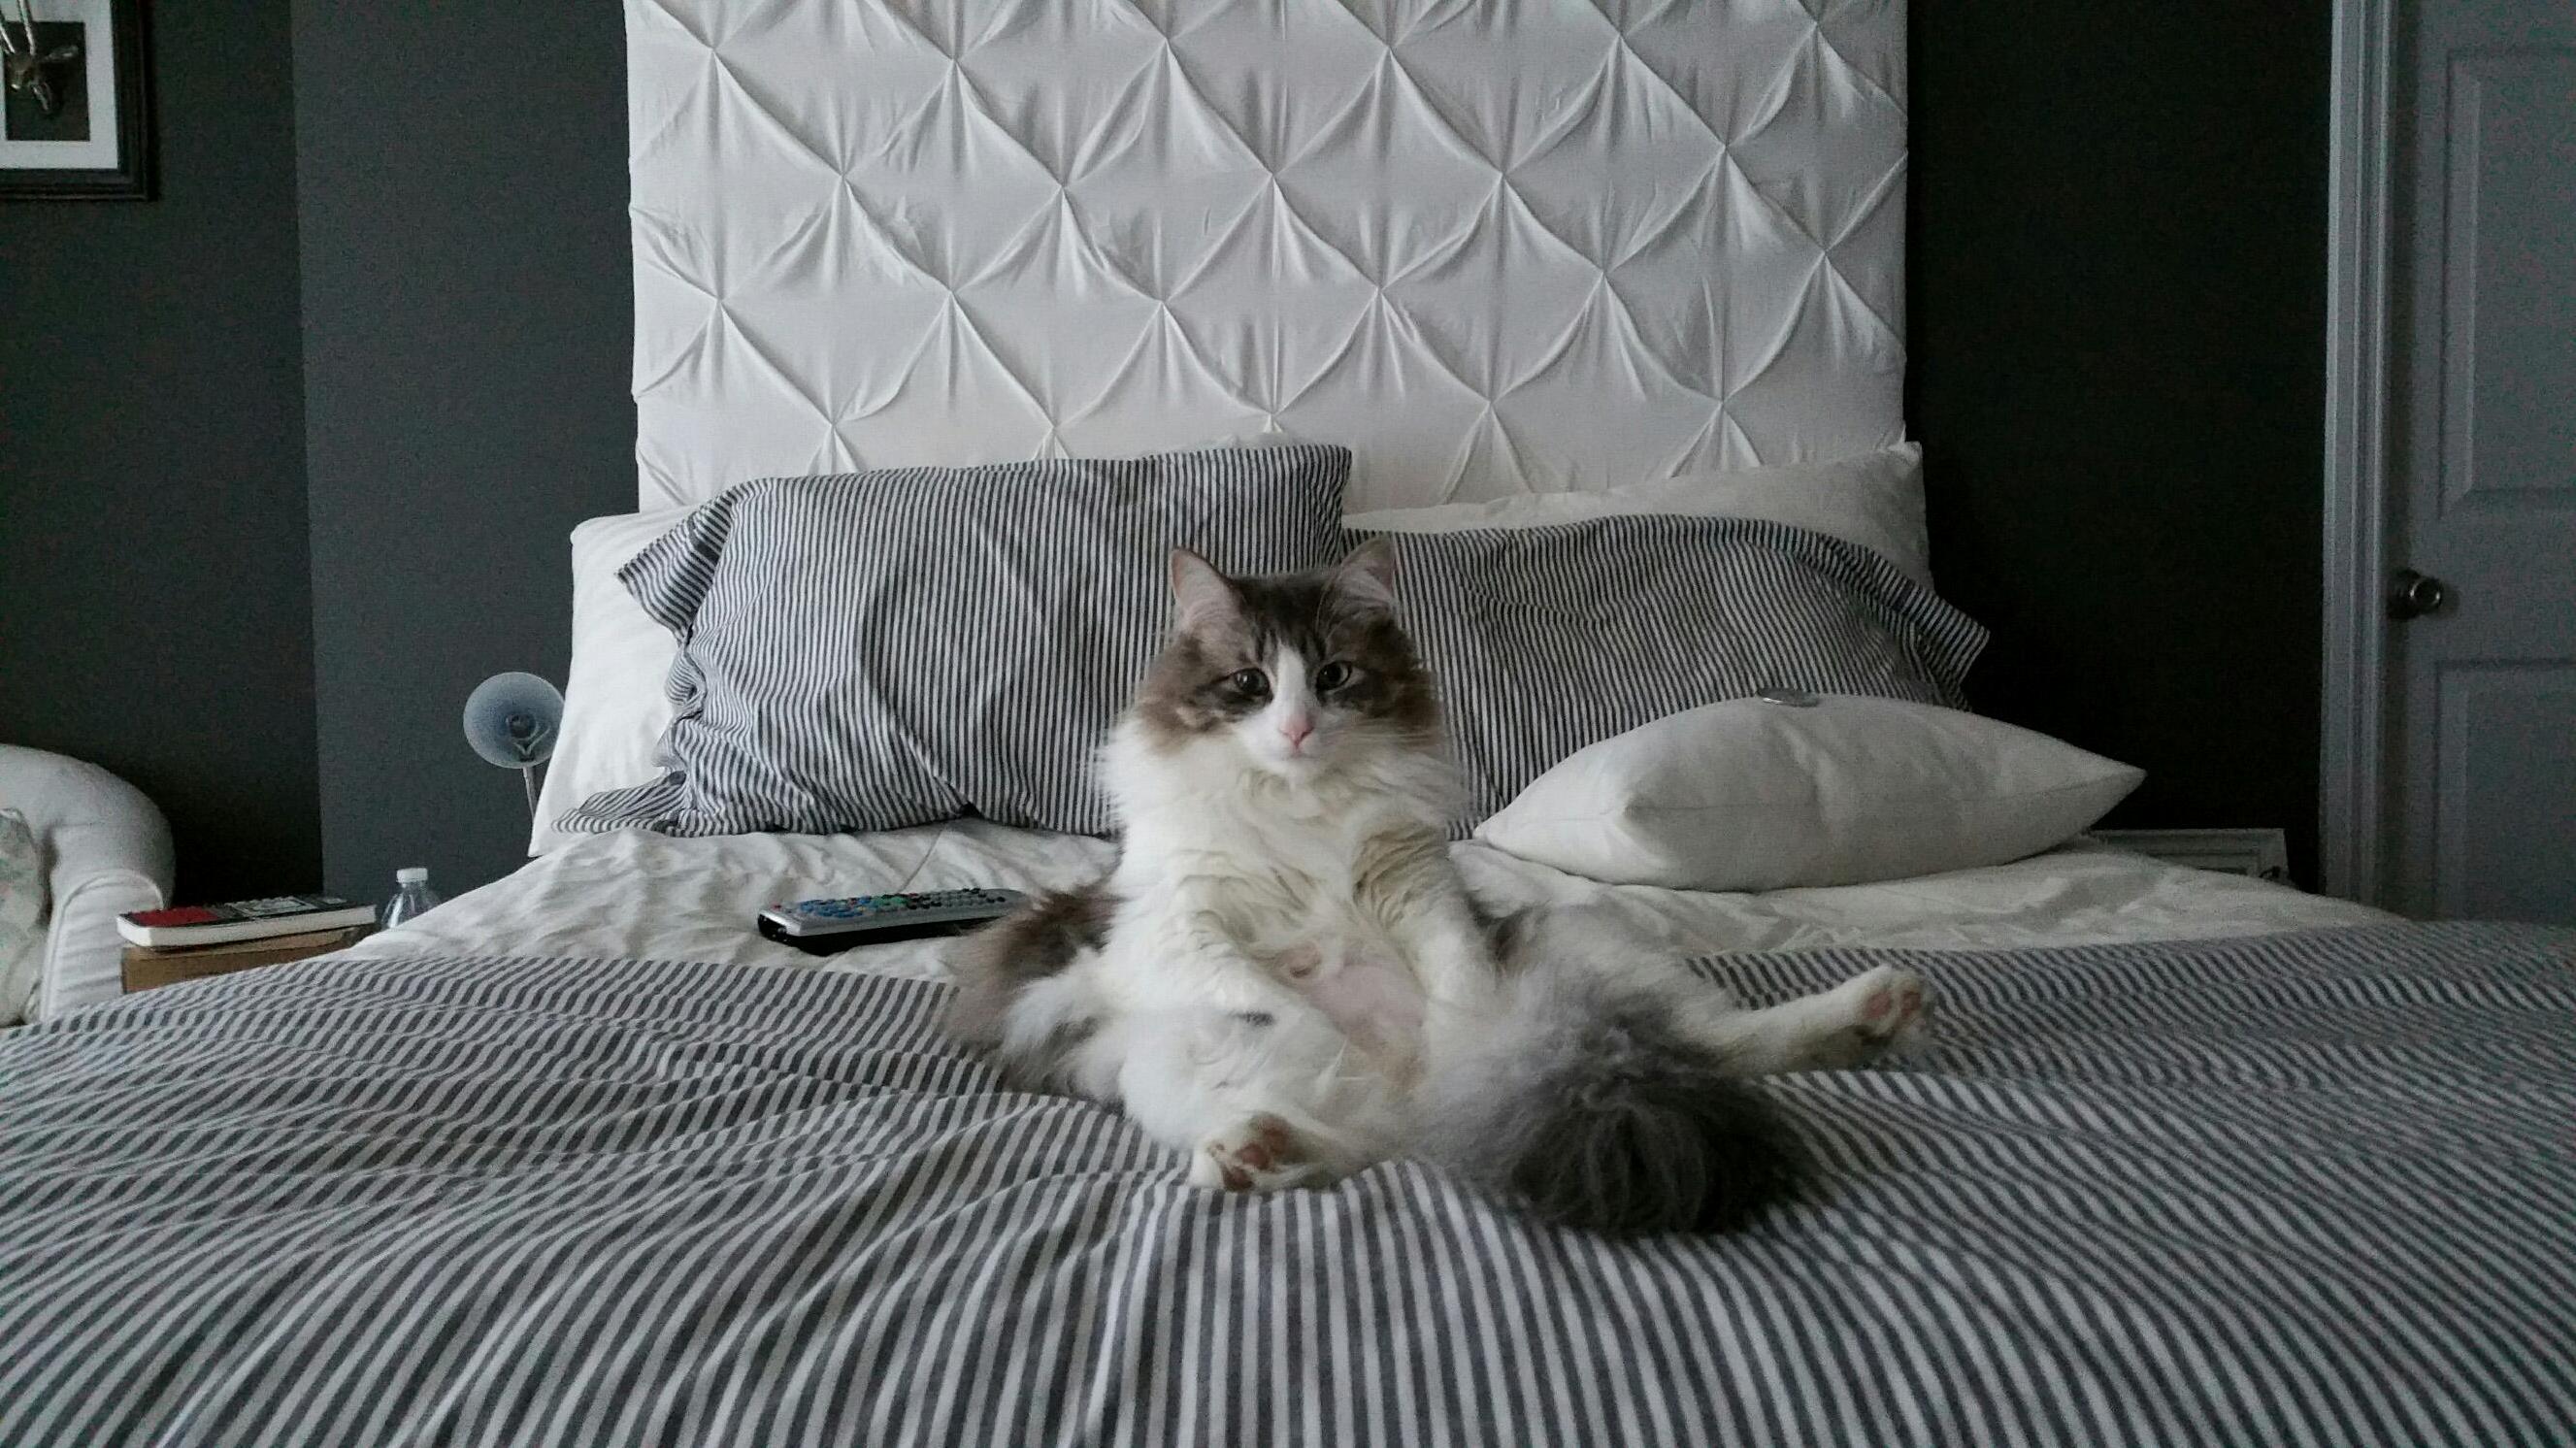 Our cat fred sits like a human